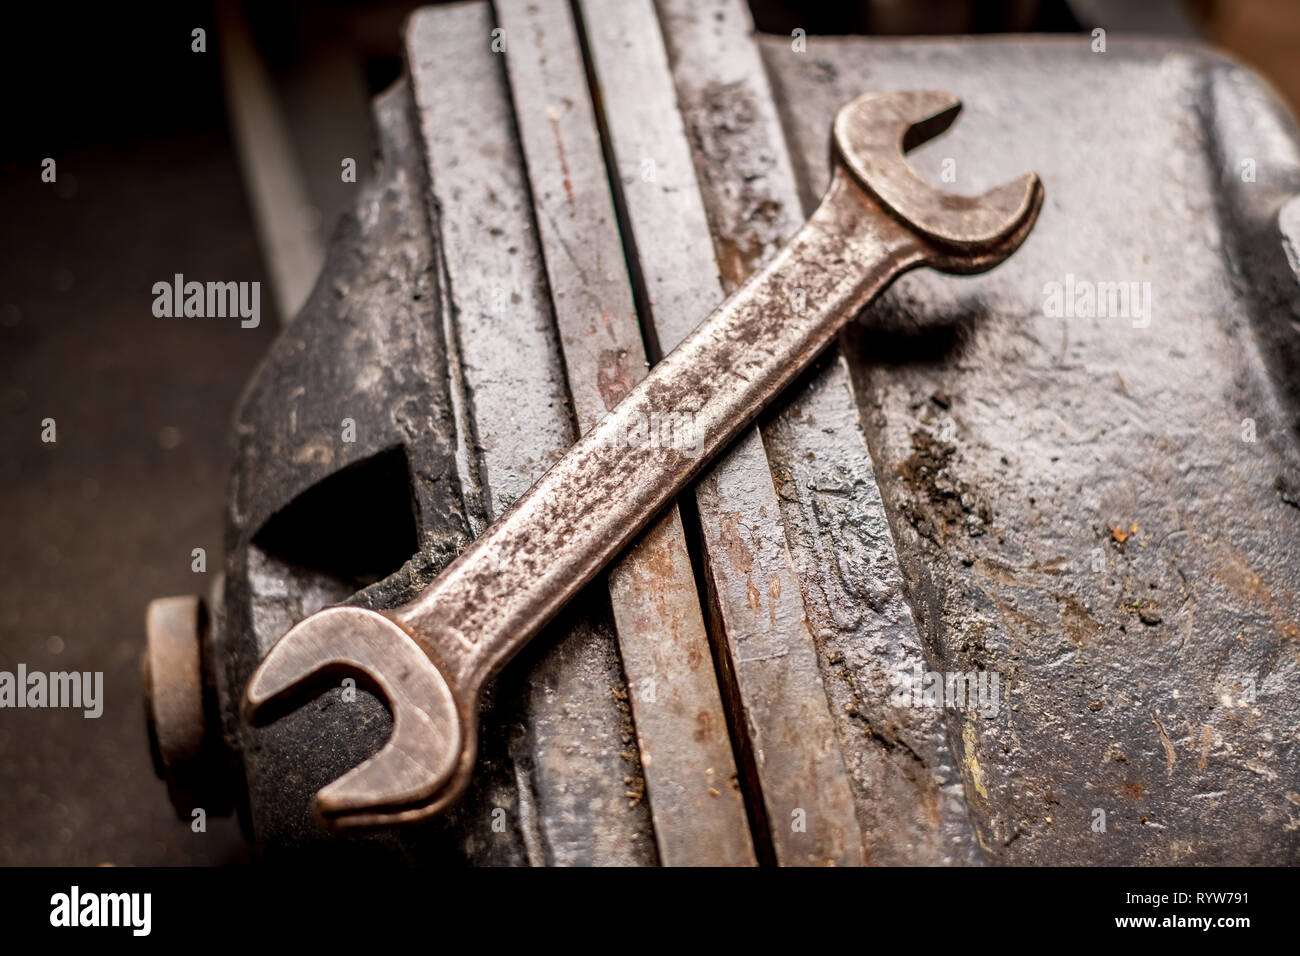 Big Vice High Resolution Stock Photography and Images - Alamy